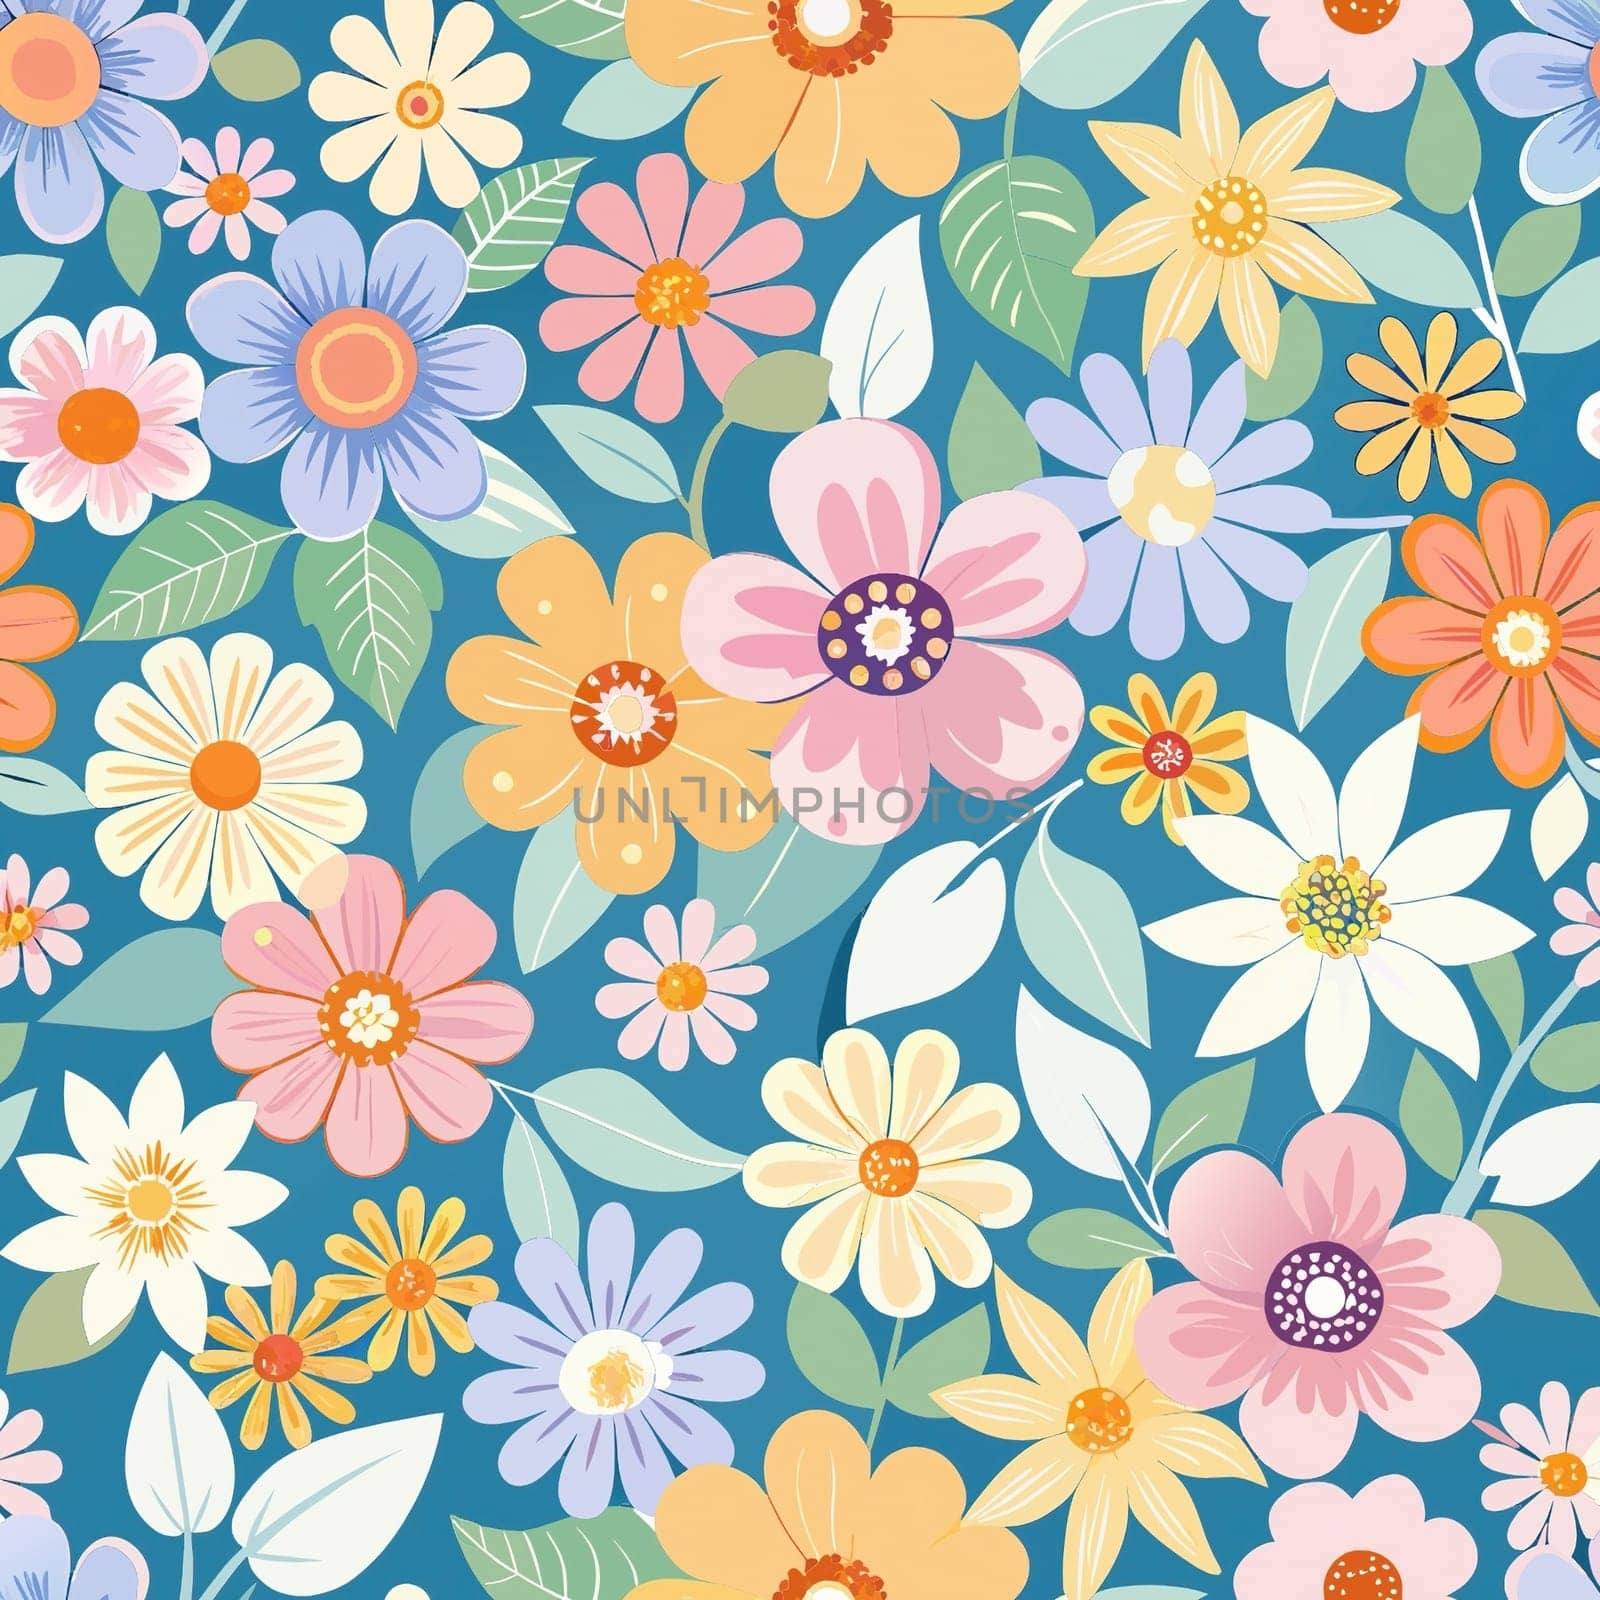 Floral seamless pattern with pink flowers and green leaves by yilmazsavaskandag